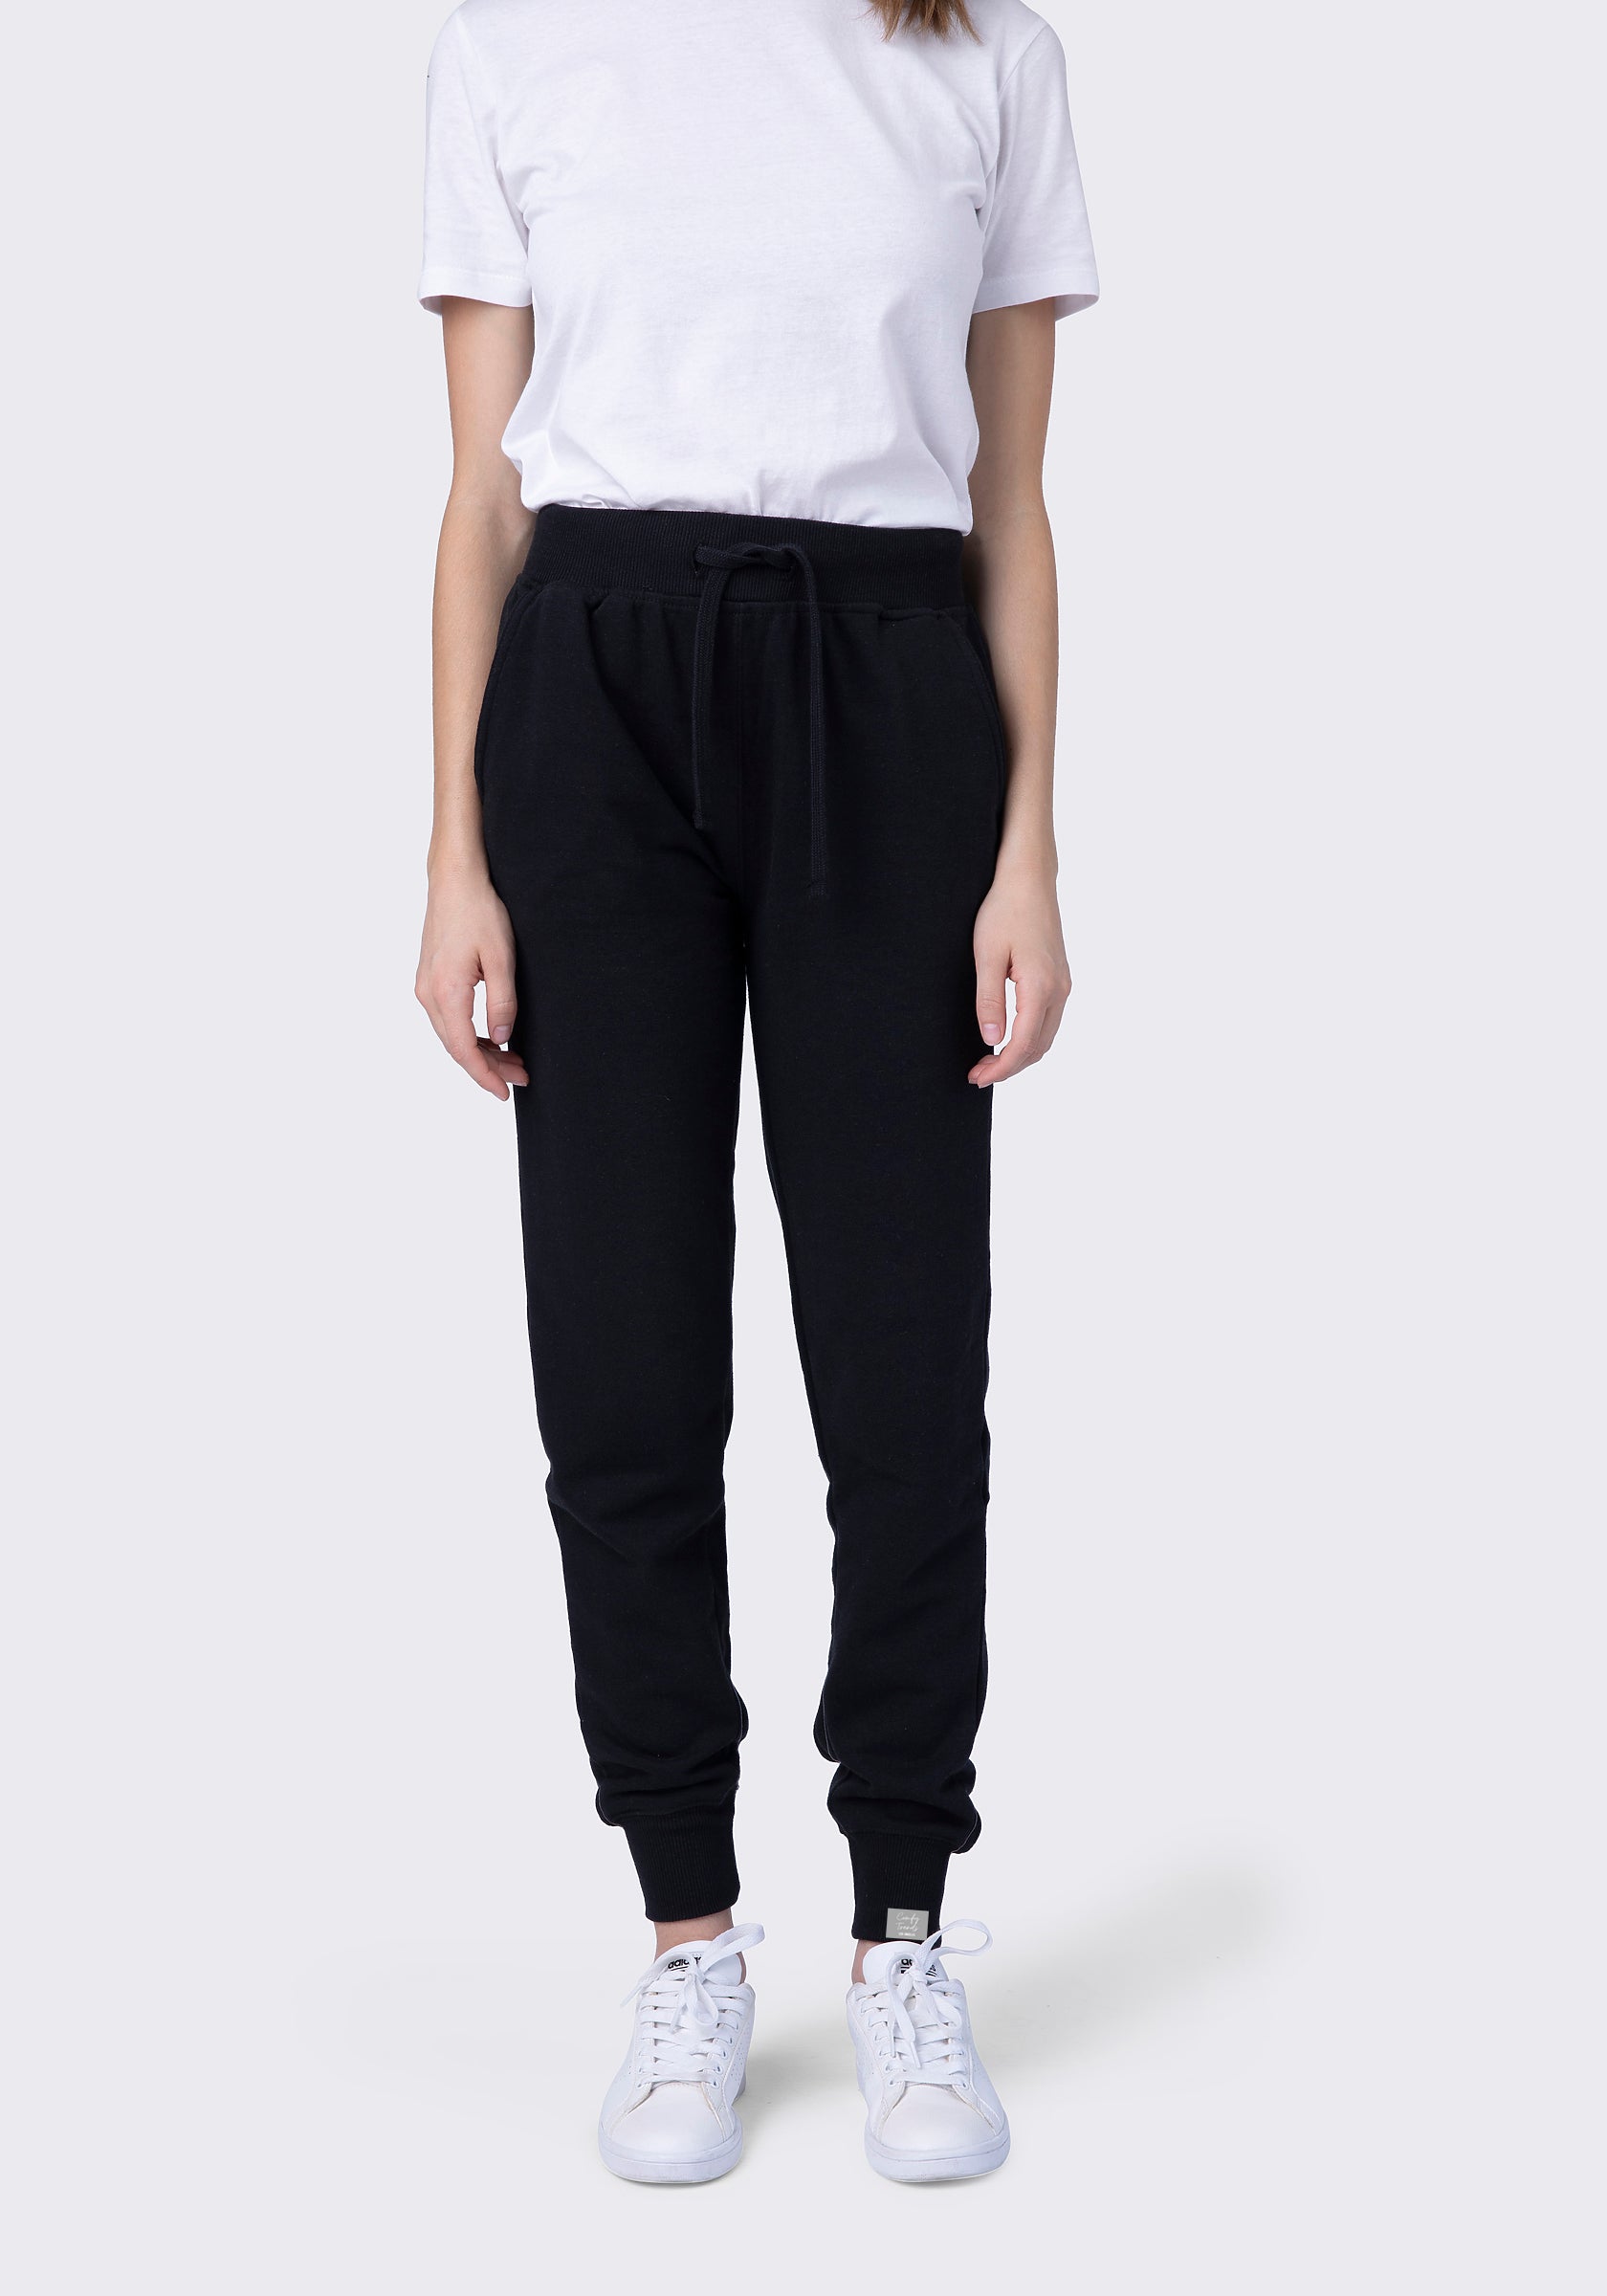 Soft Comfy French Terry Joggers